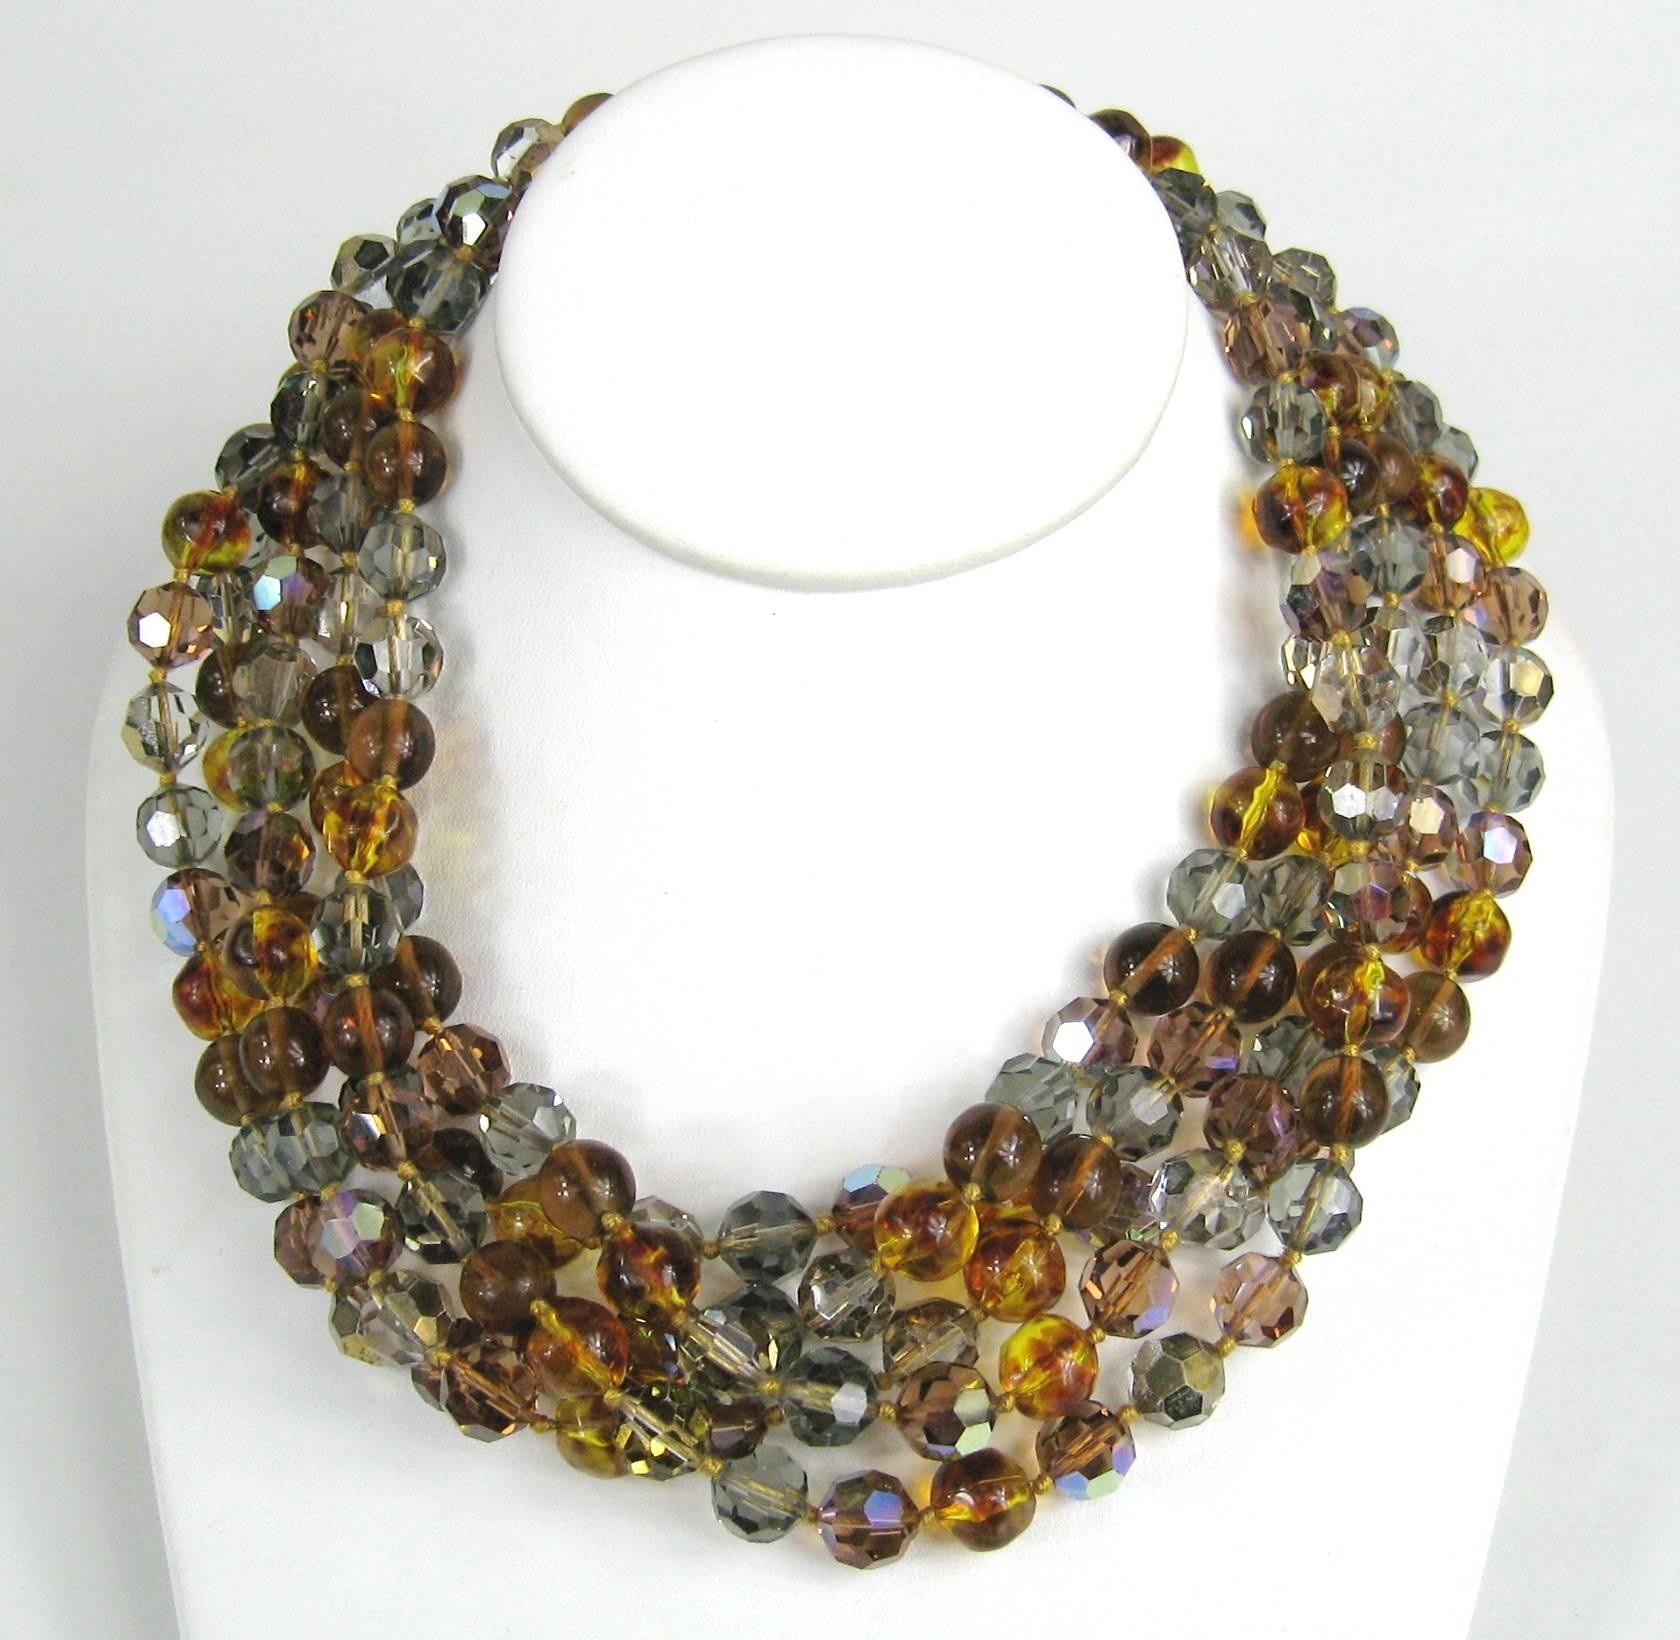 5 Strand Ombre Ciner Necklace. Purchased in the late 1980s and never worn. It has stunnignAmber, yellow to clear on the faceted beads. Measuring 19 inches end to end. Beads measure  9.5 mm. Still has Neiman Marcus tag attached. This is out of a